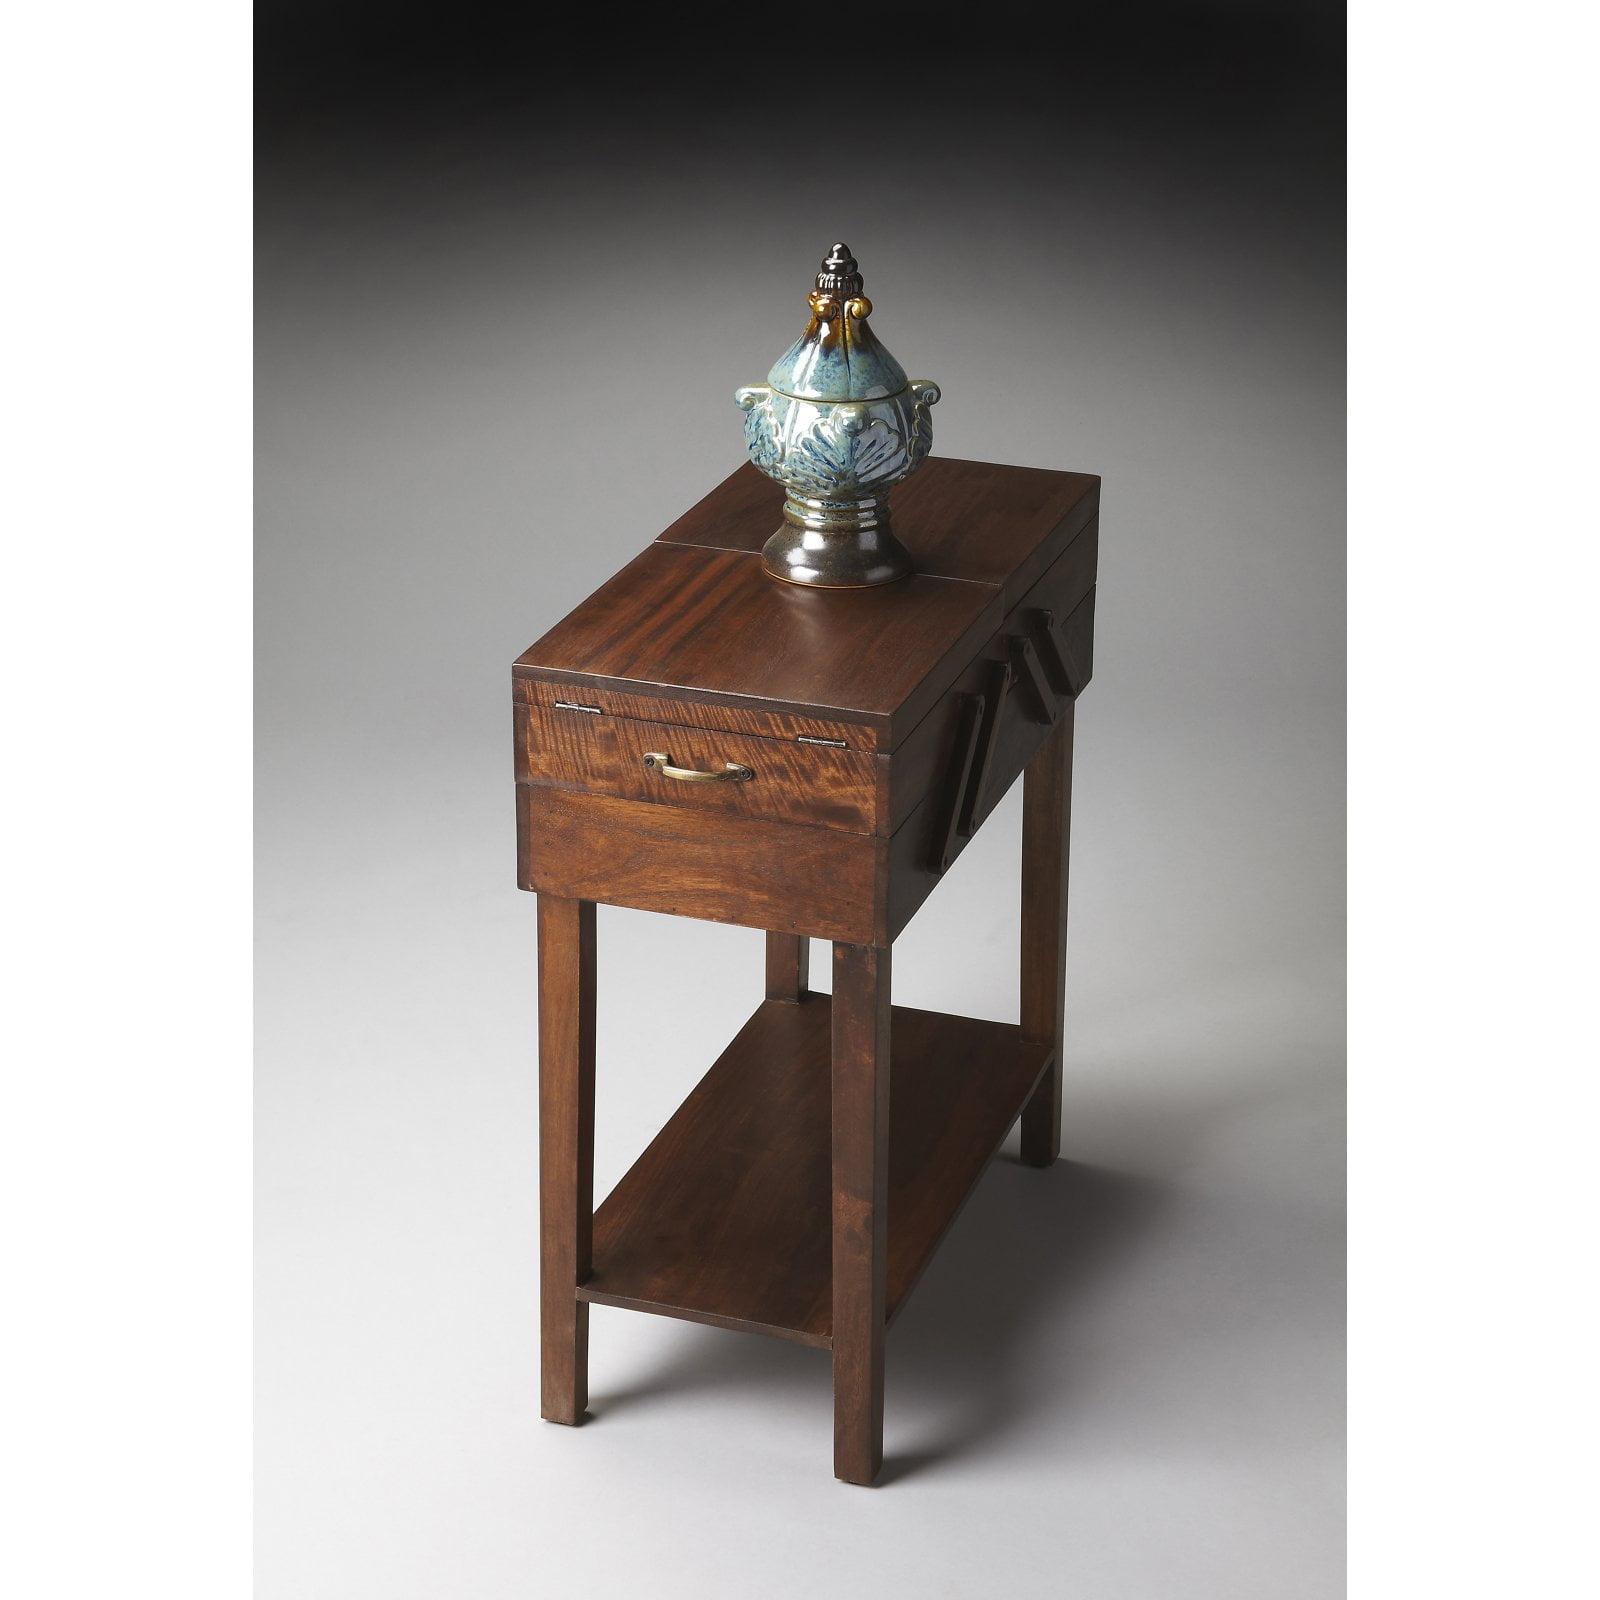 Provincial Acacia Wood Chairside Table with Storage